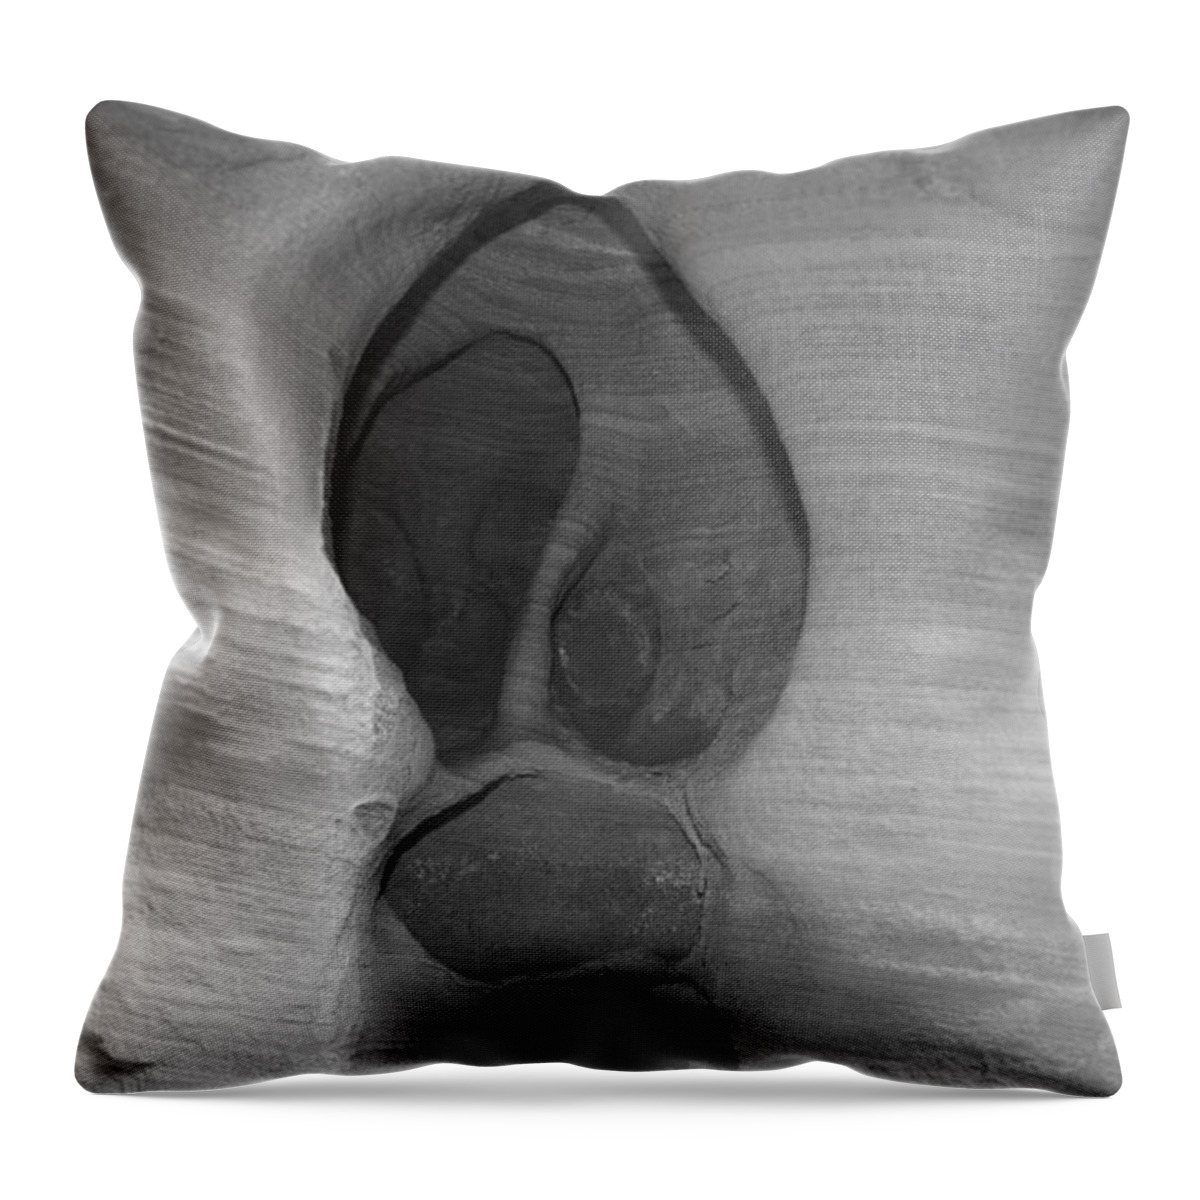 Elements Throw Pillow featuring the photograph Rock Design by Aidan Moran